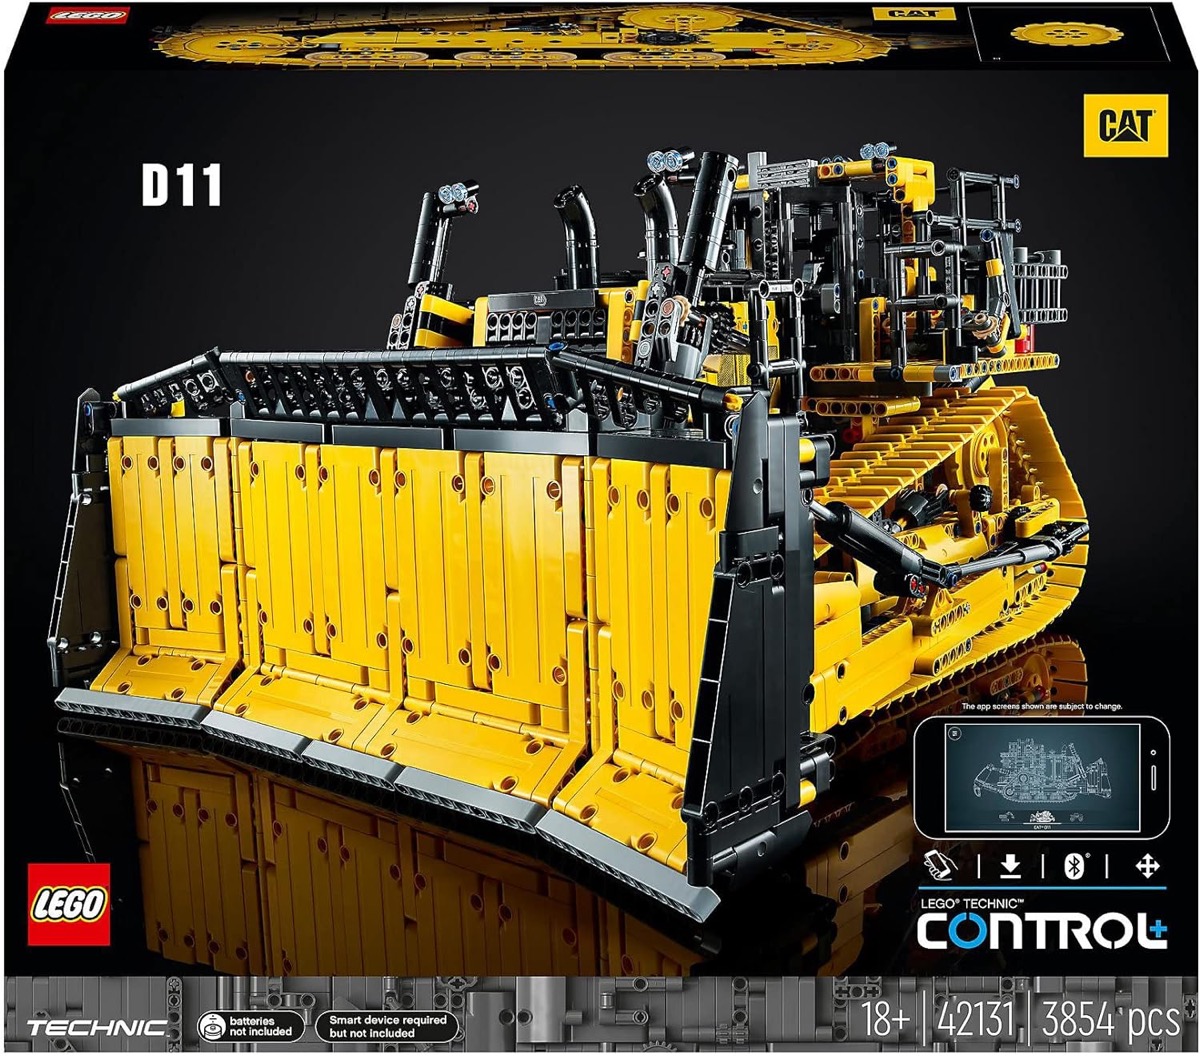 A model of the Cat (R) D11 Bulldozer by LEGO 